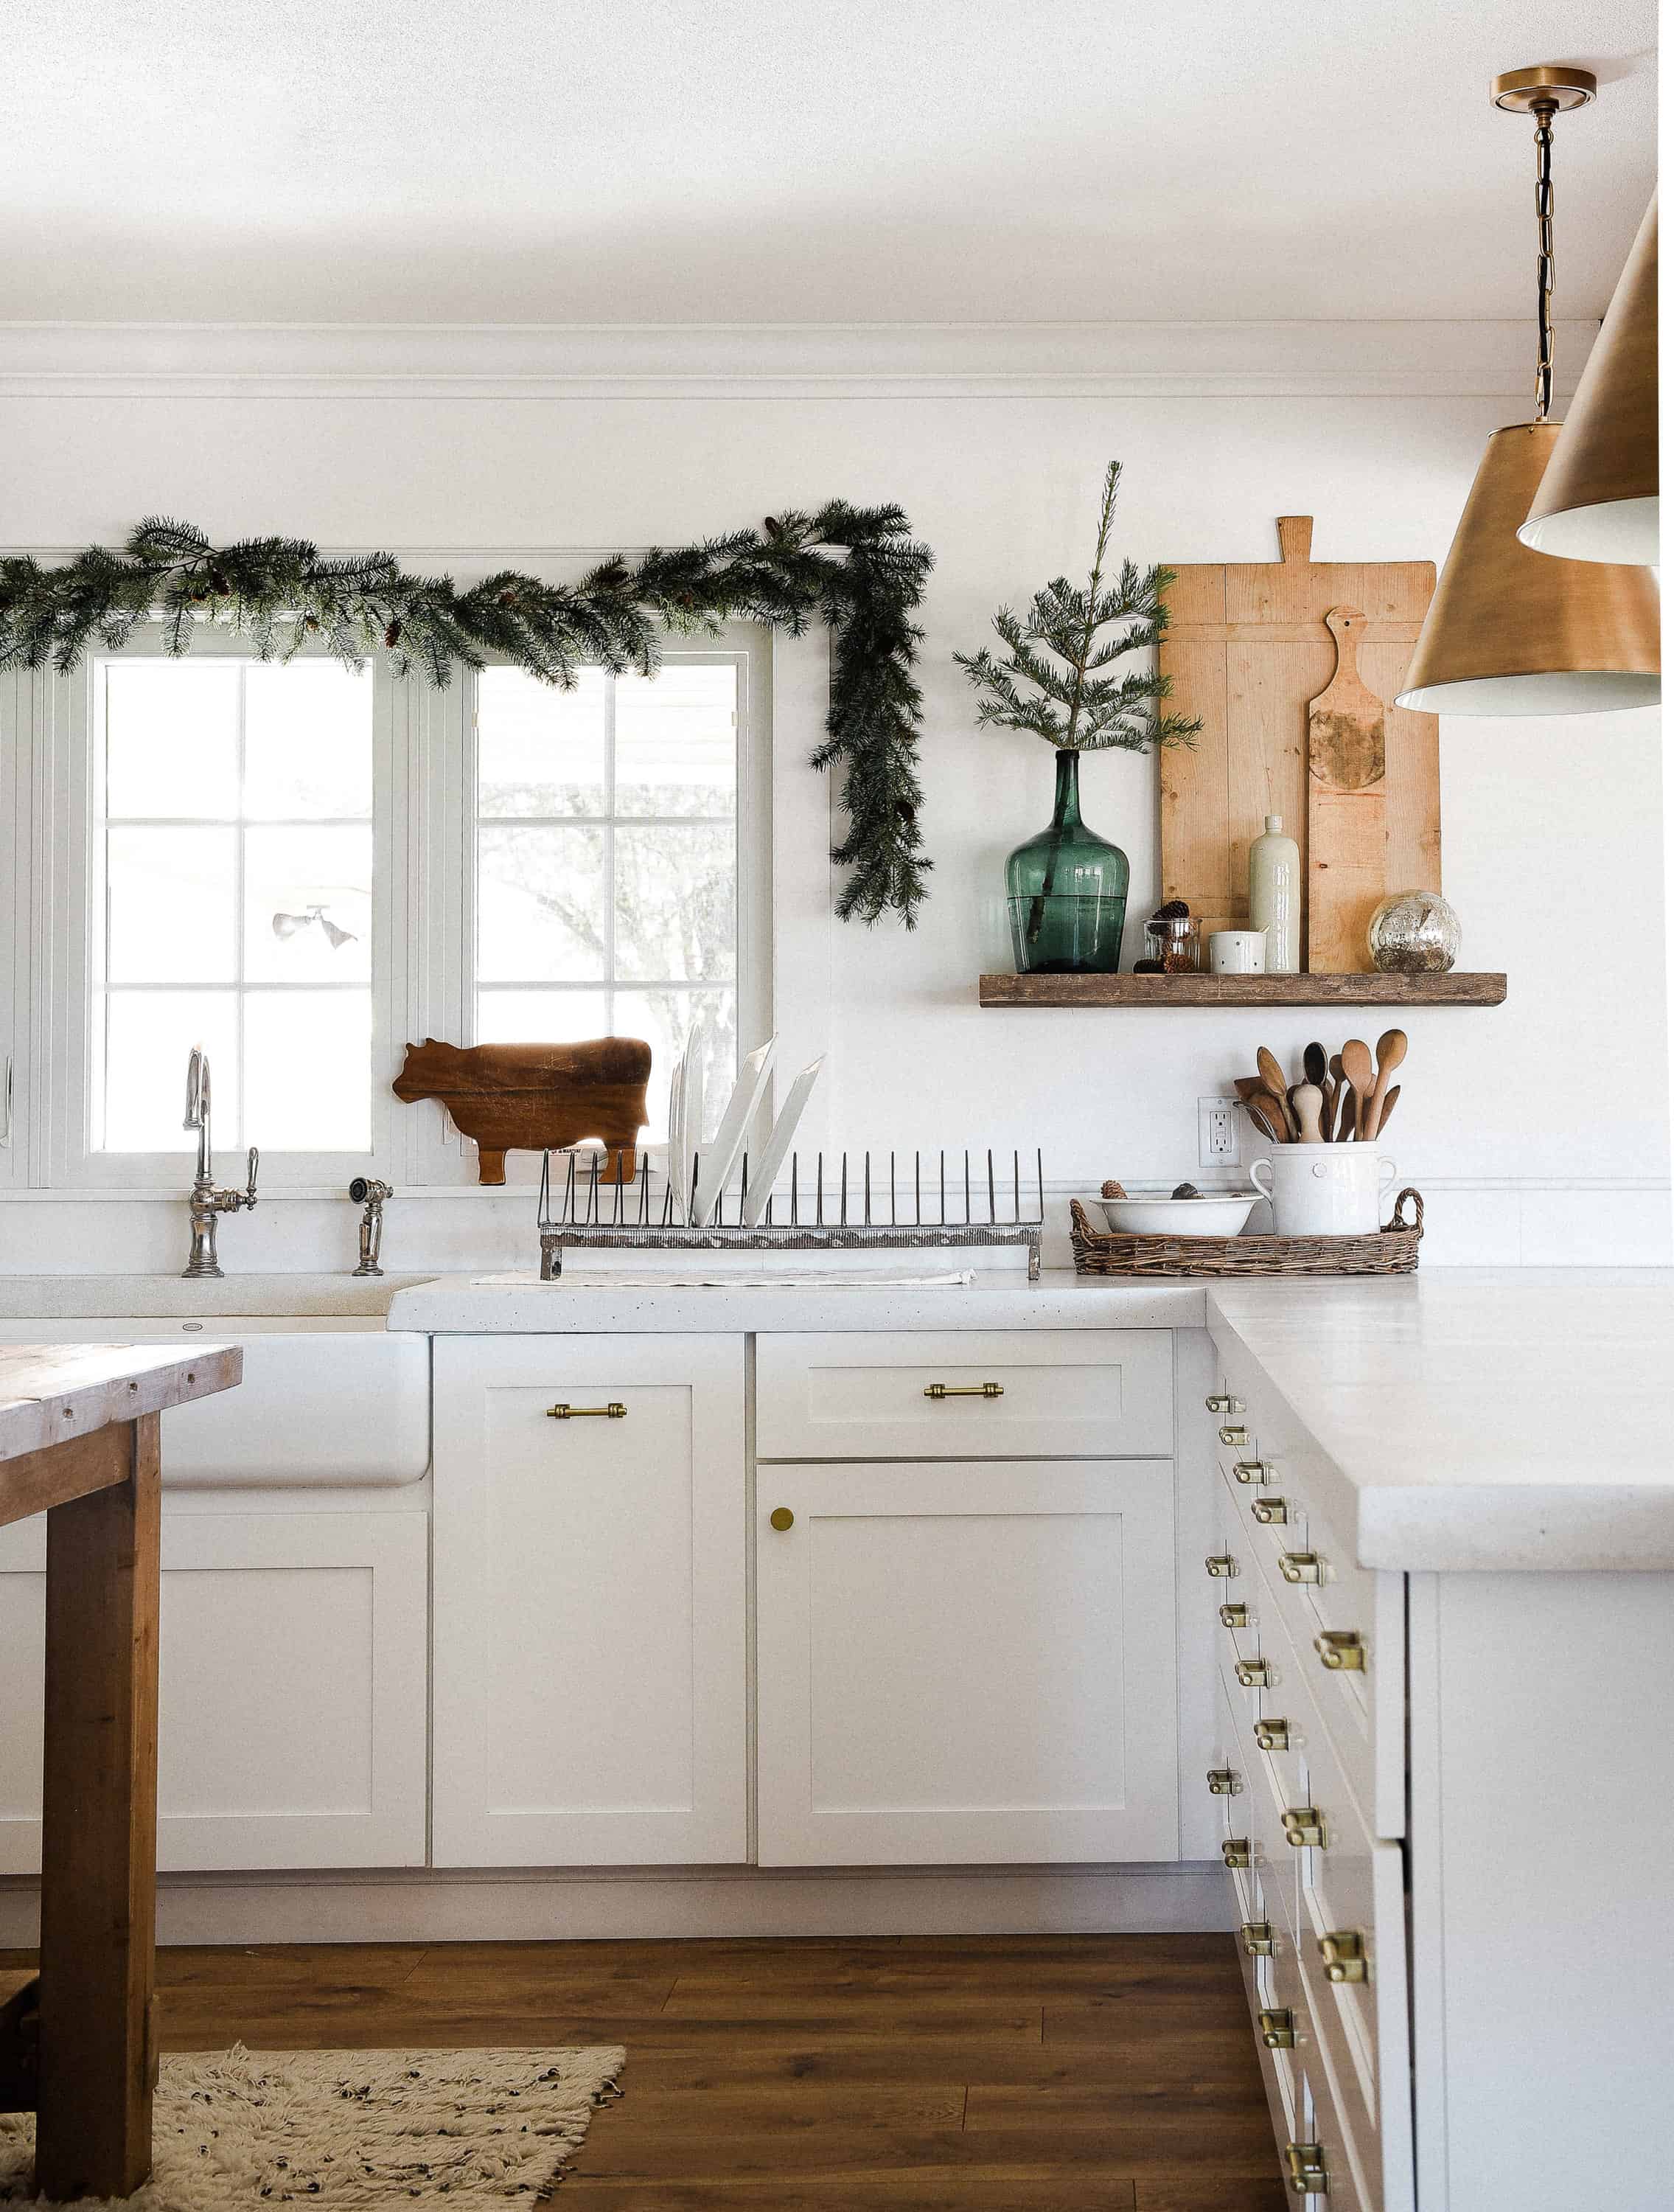 Tour our Christmas kitchen to gather ideas for decorating for the holidays this year! Use greenery and vintage touches to keep things simple and cohesive!